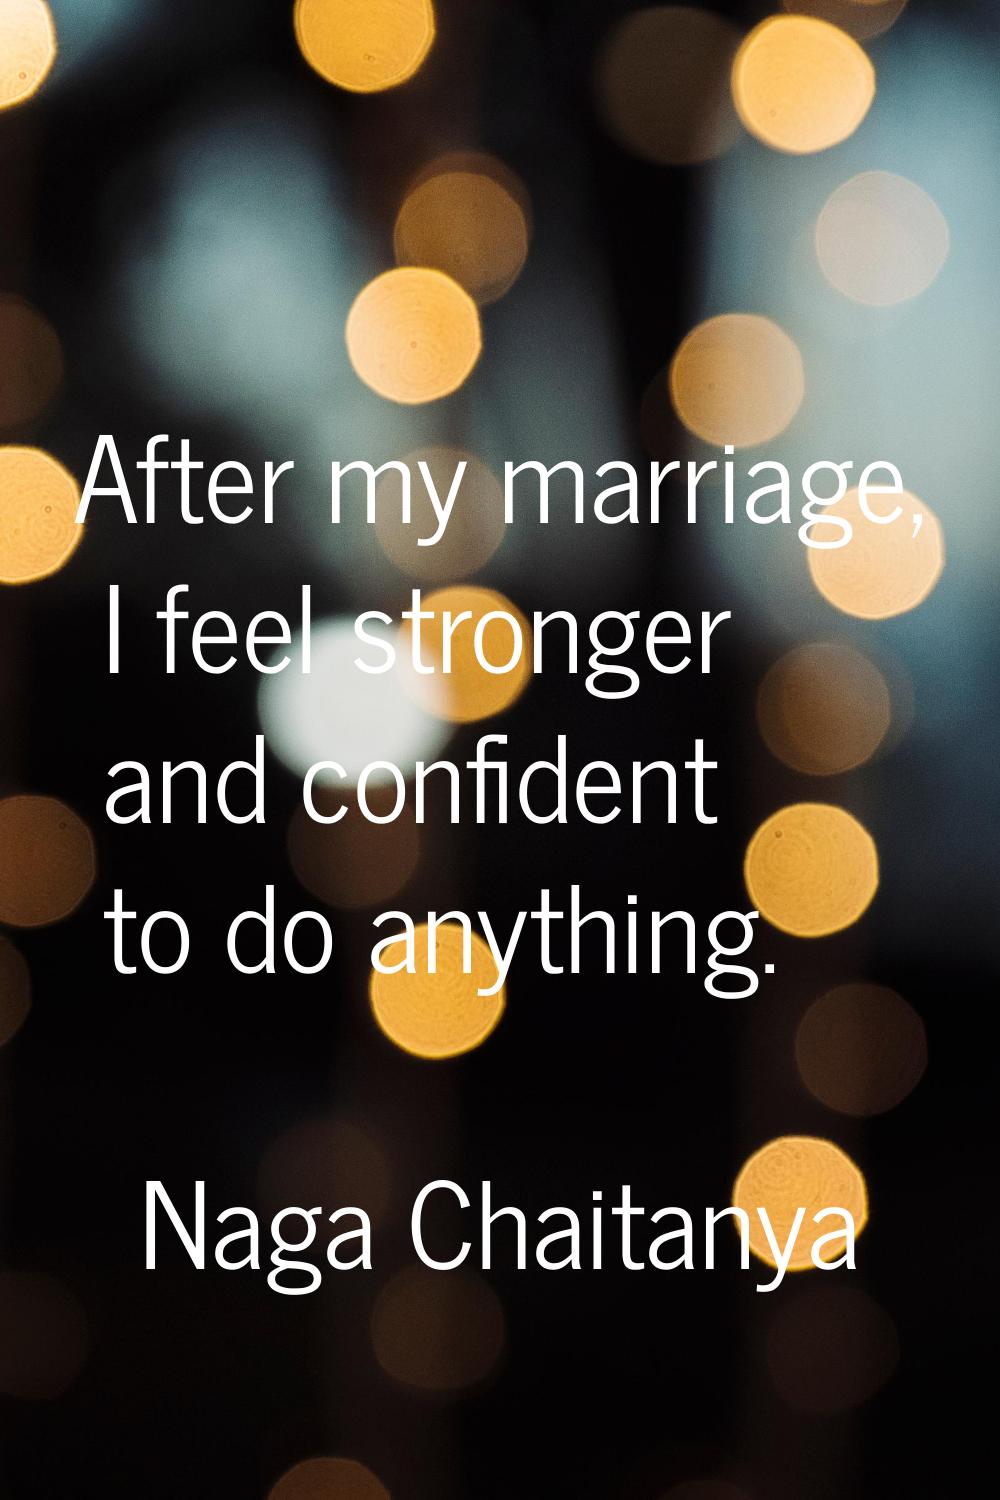 After my marriage, I feel stronger and confident to do anything.